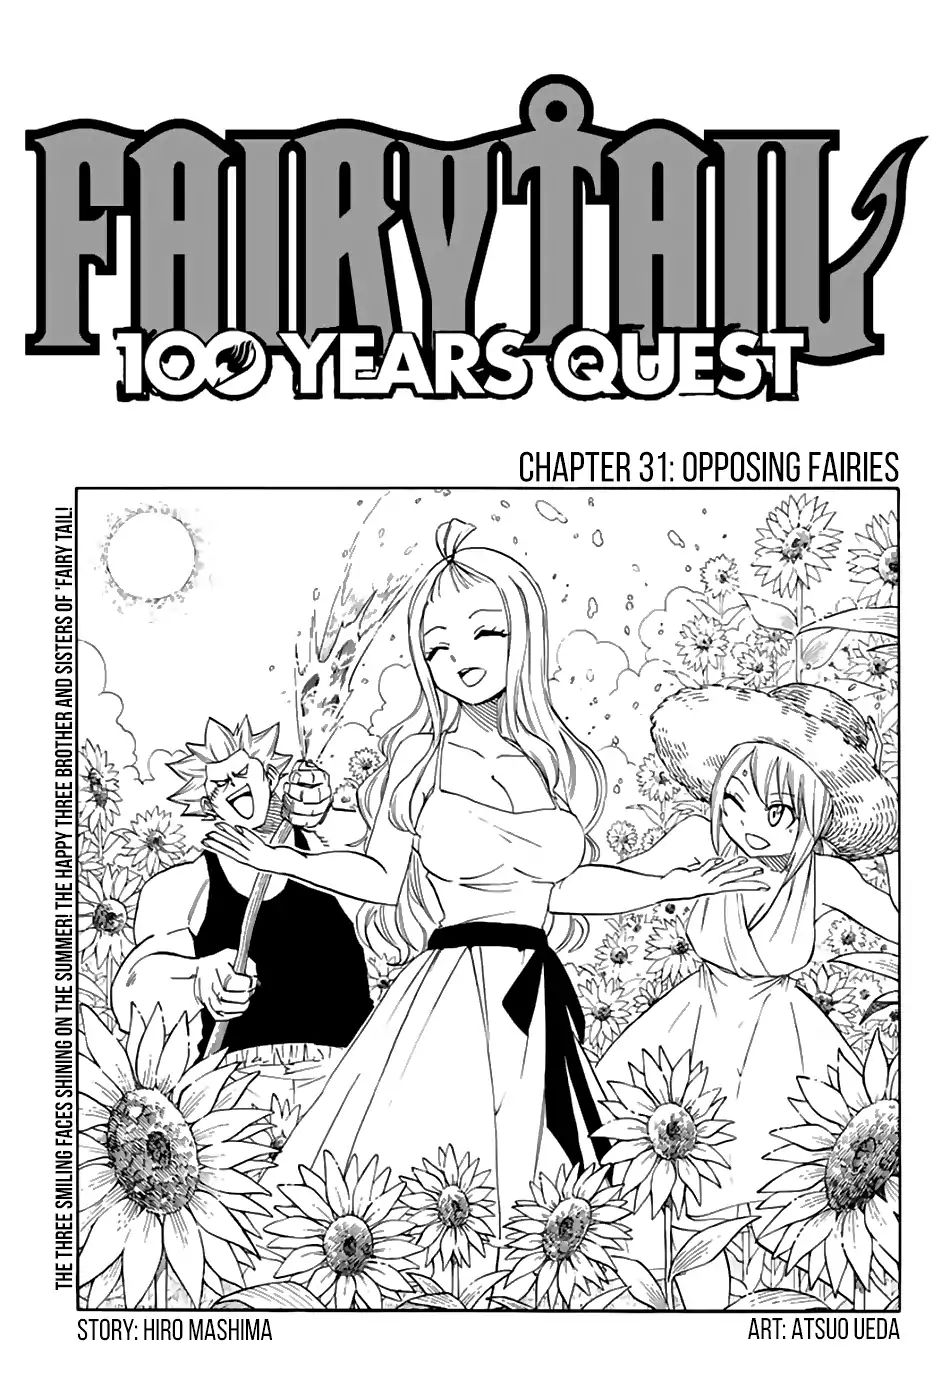 Fairy Tail 100 Years Quest 31 1